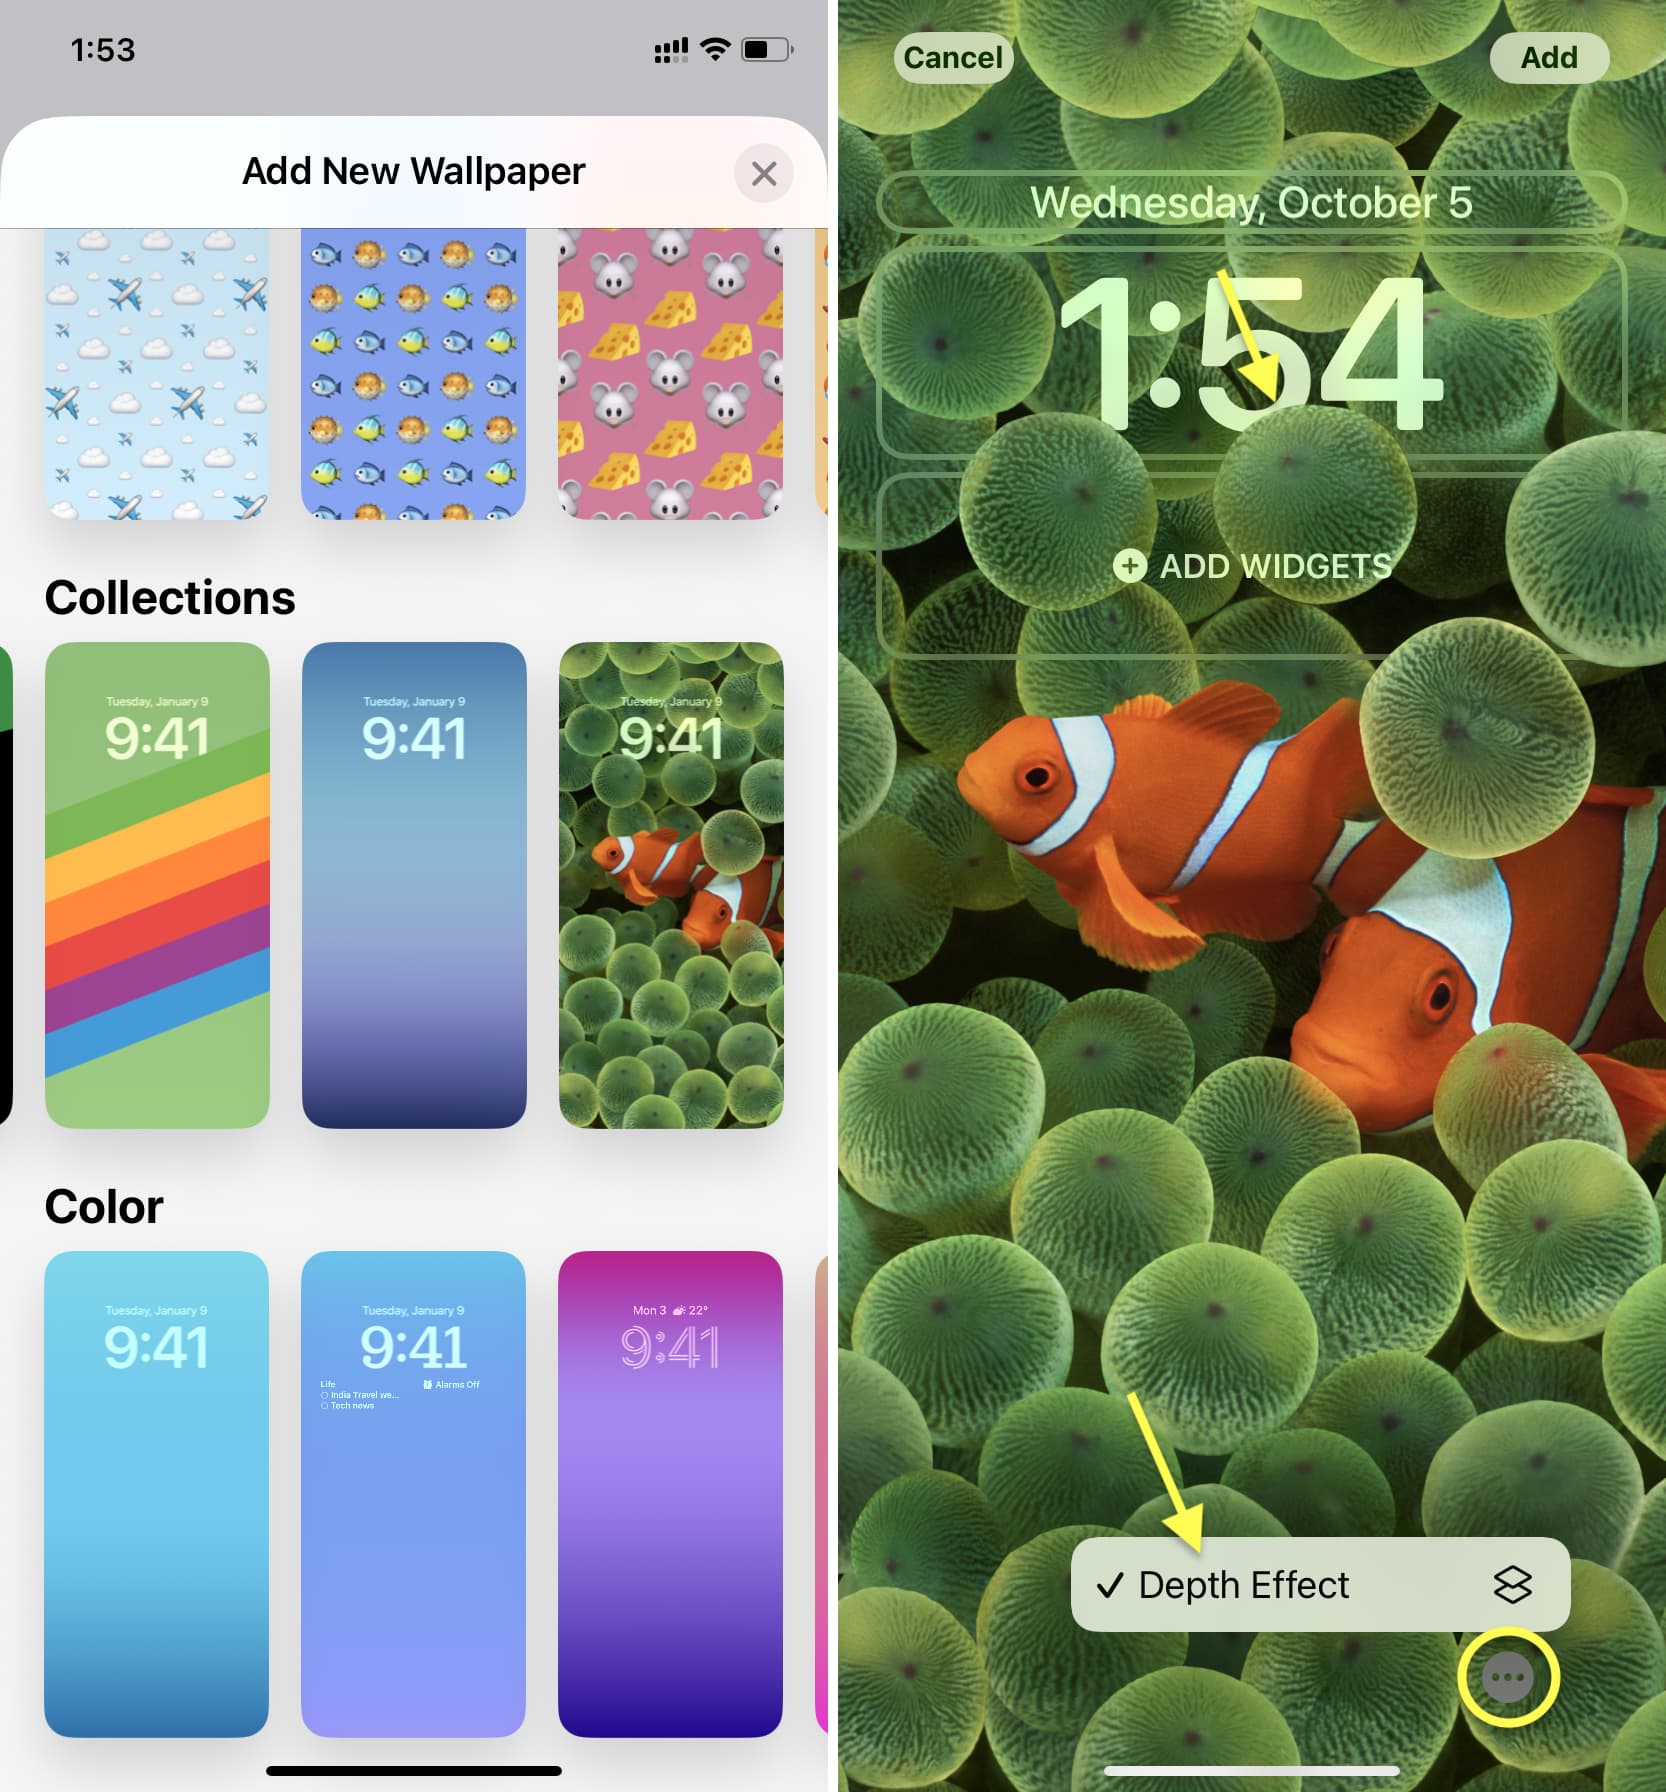 Enable Depth Effect while setting wallpaper on iPhone